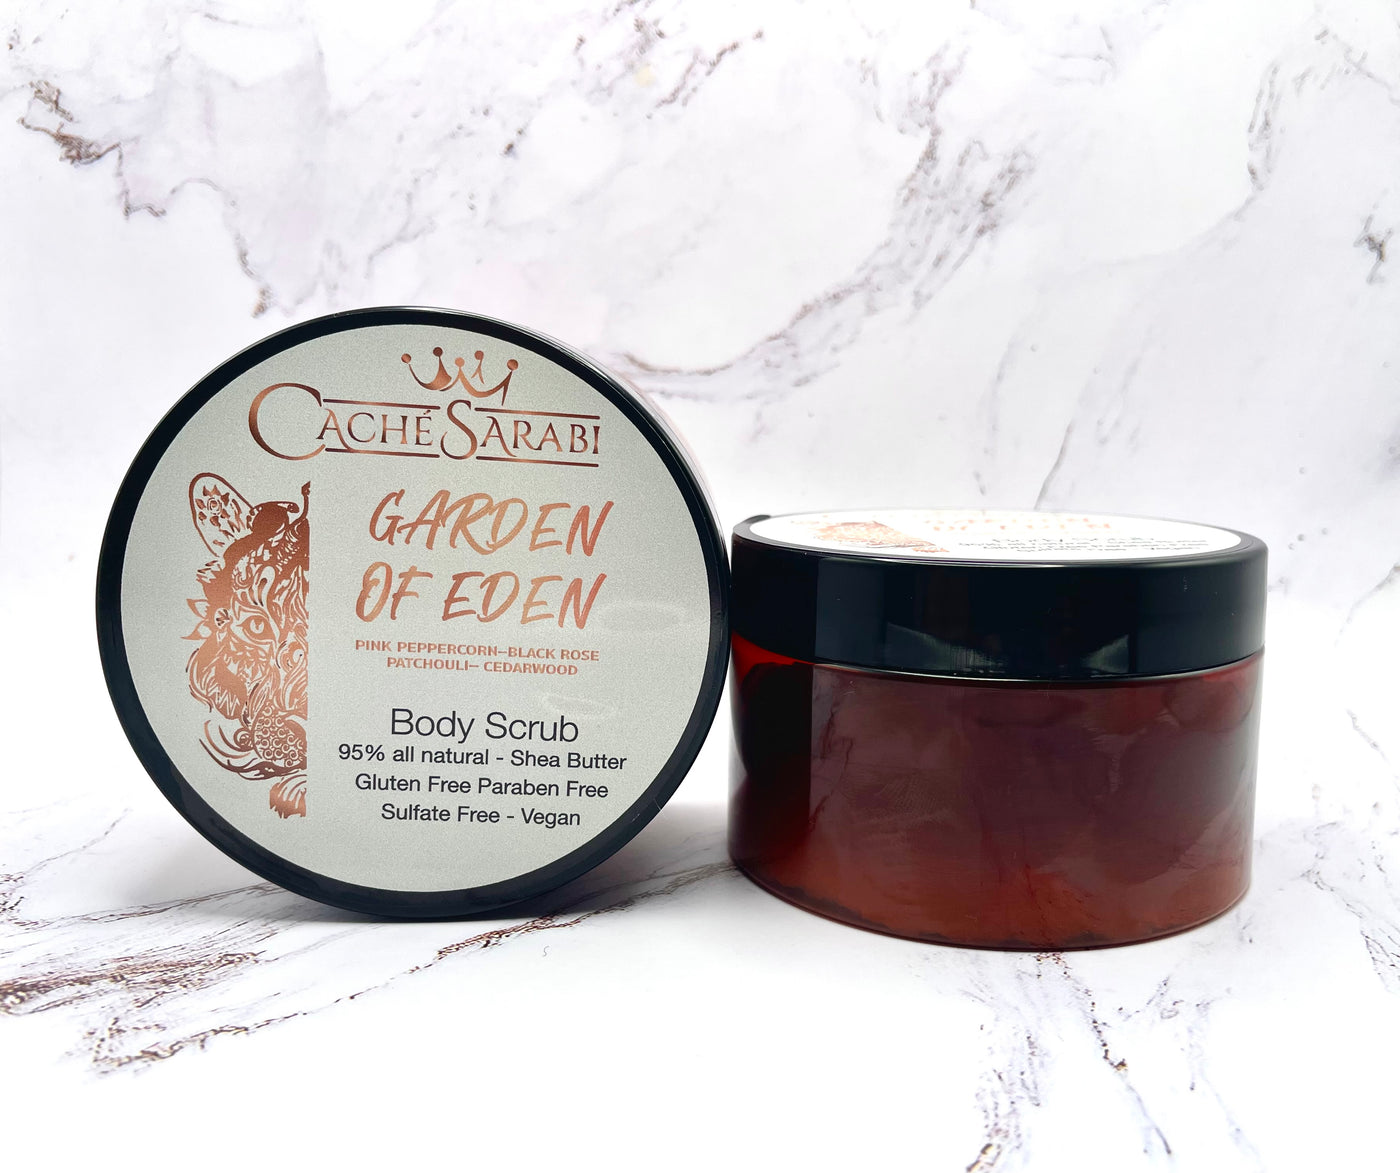 Feel pampered as your skin is enveloped in the natural and exquisite properties of this premium body scrub.